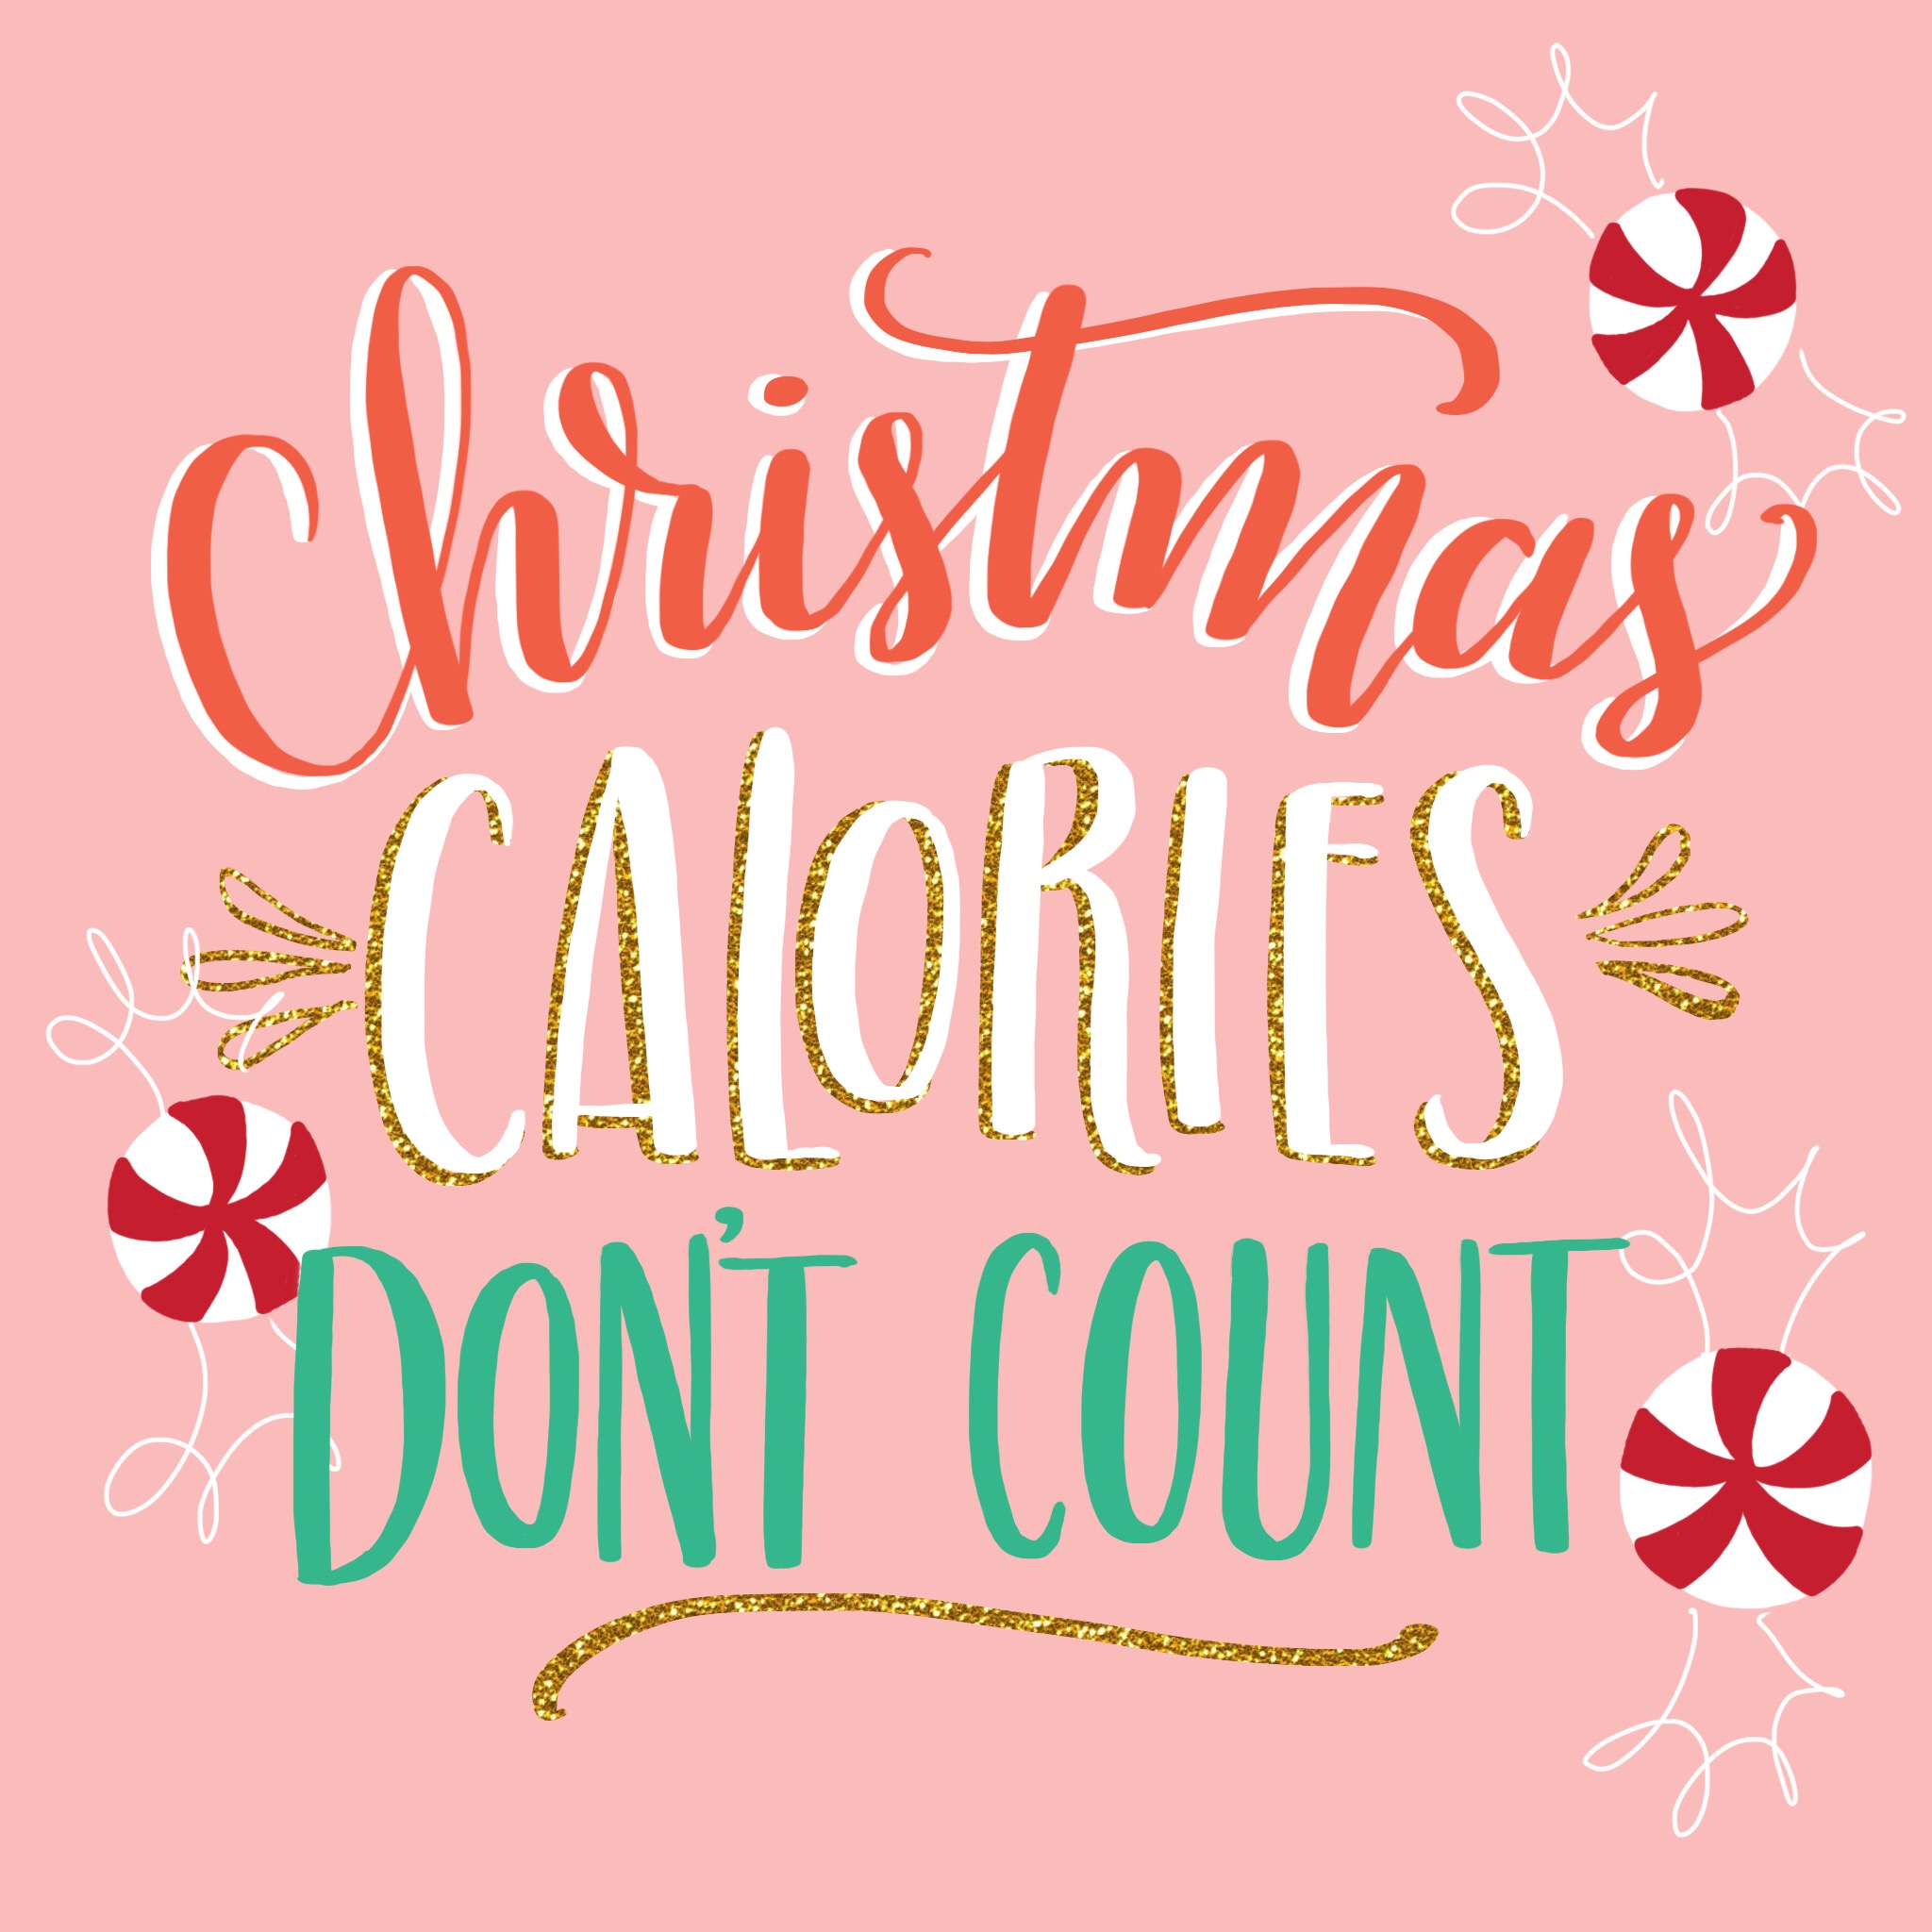 Christmas Calories Don't count. Free iphone download on Lily & Val Living